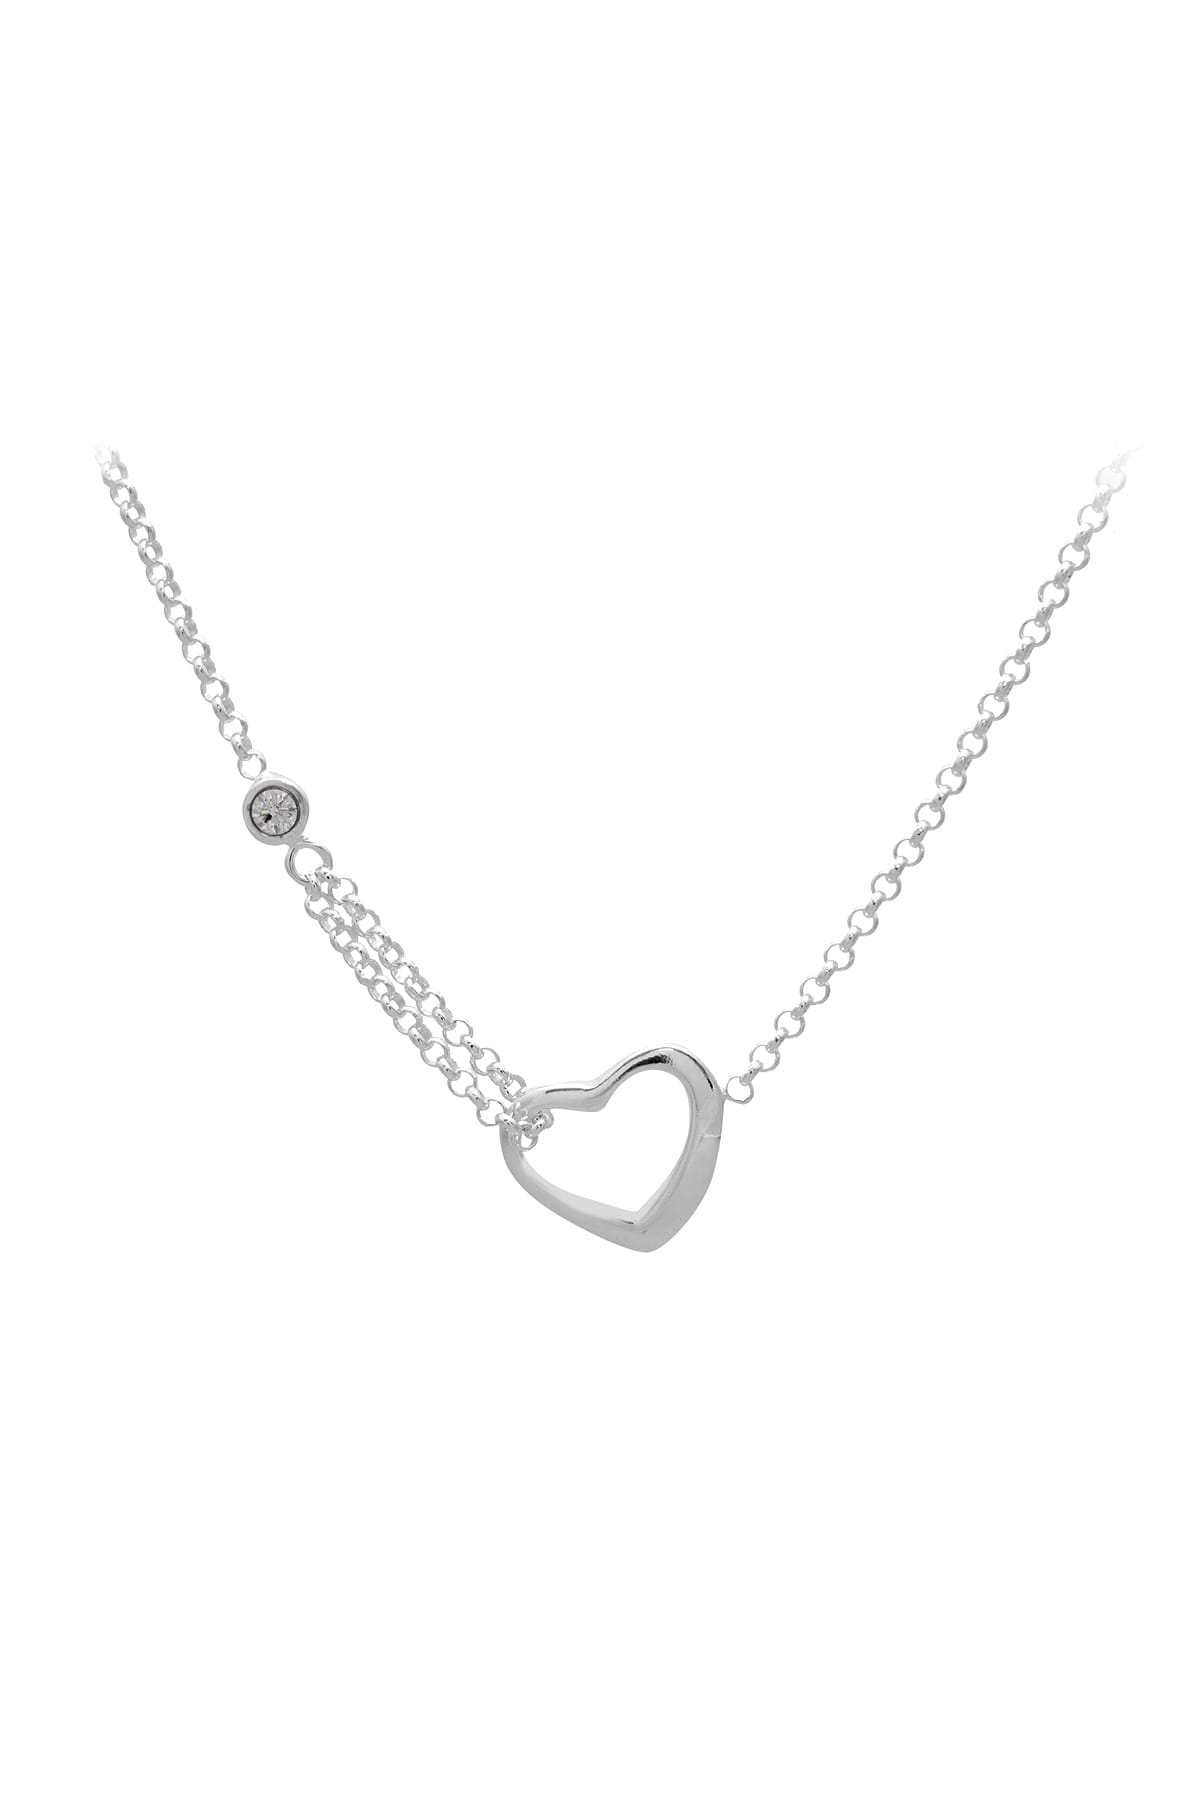 Sterling Silver Italian Open Heart and Cubic Zirconia Necklet available at LeGassick Diamonds and Jewellery Gold Coast, Australia.